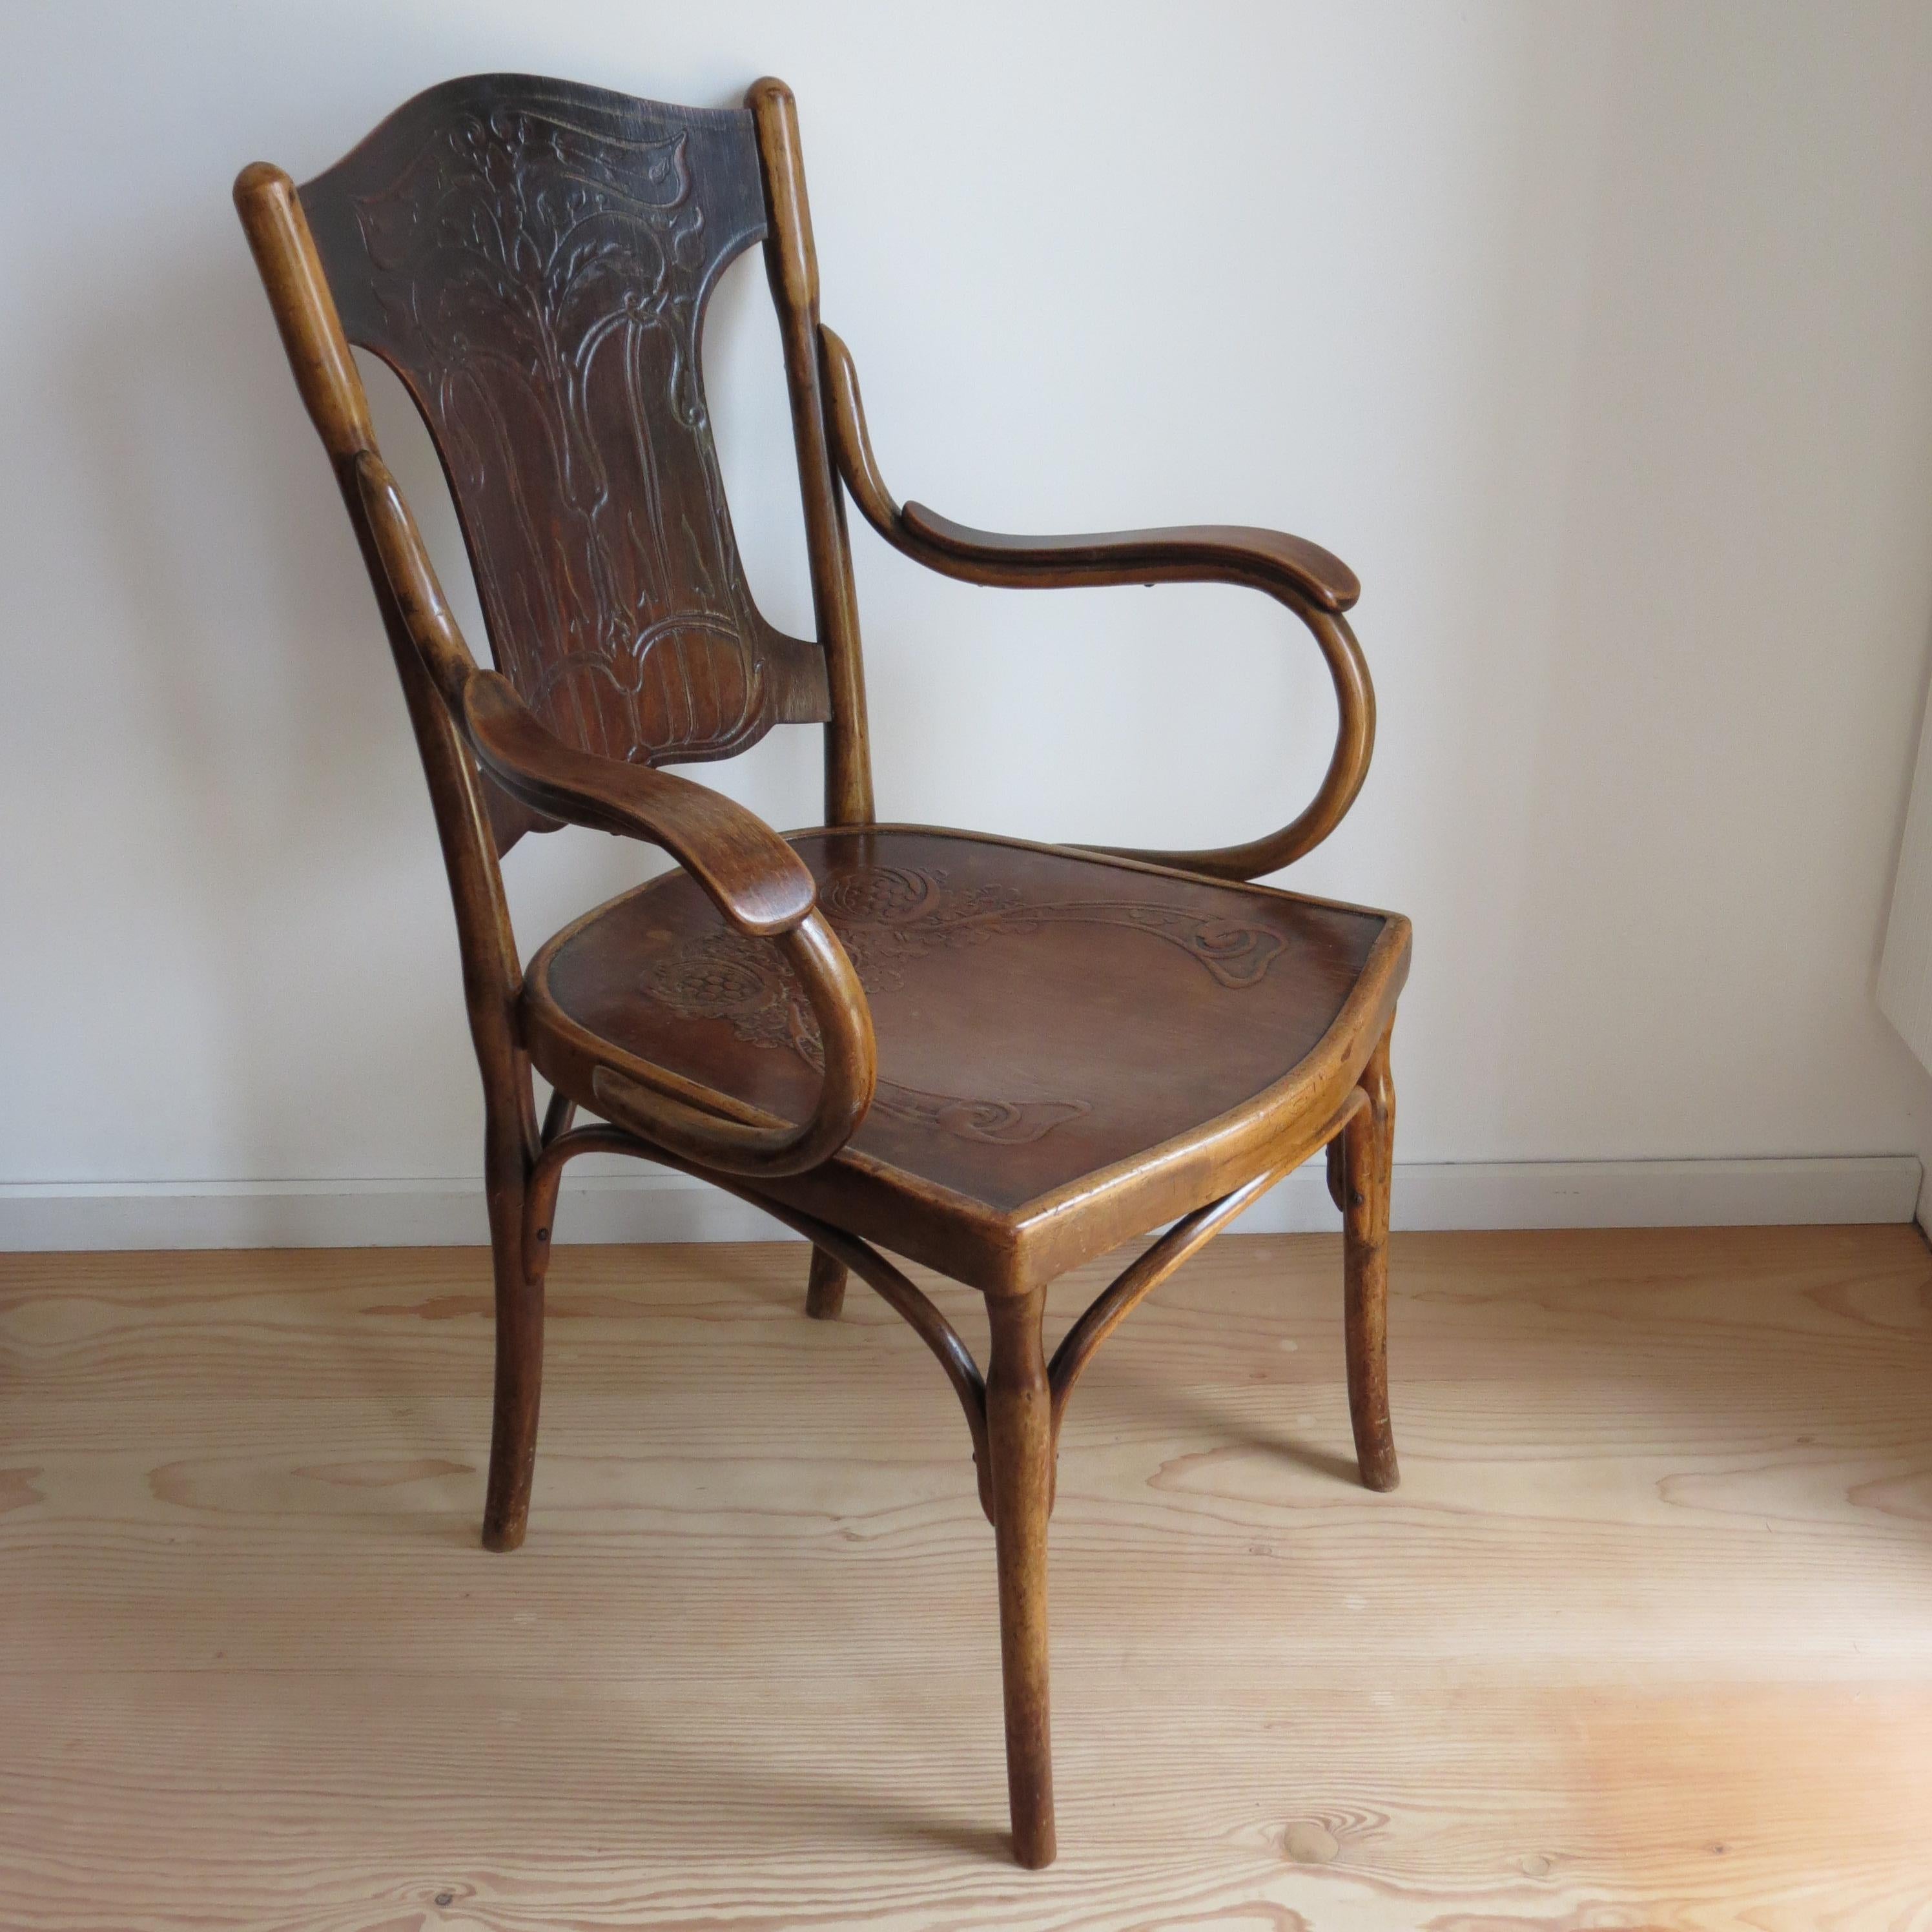 Wonderful Vienna Secessionist bentwood chair from the early 1900s. Designed by Jacob and Jospeh Kohn and manufactured by Thonet, Austria. Beech bentwood frame and embossed Plywood seat and back with wonderful Art Nouveau patterns. 

The chair is